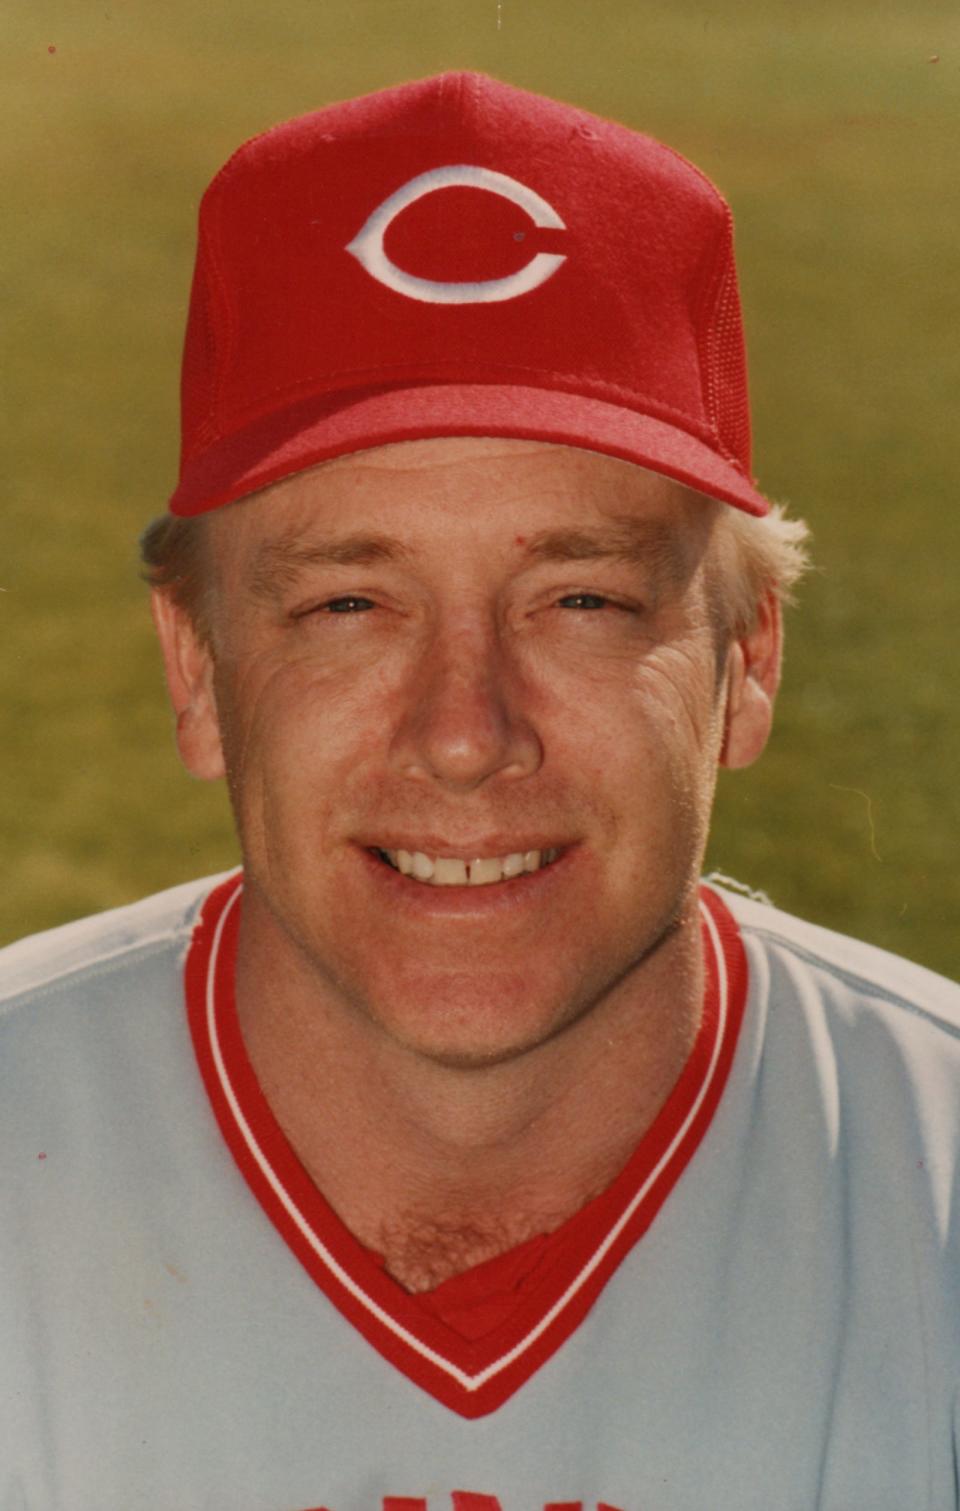 Former Moeller star Buddy Bell played third base for the Reds from 1985-1988.